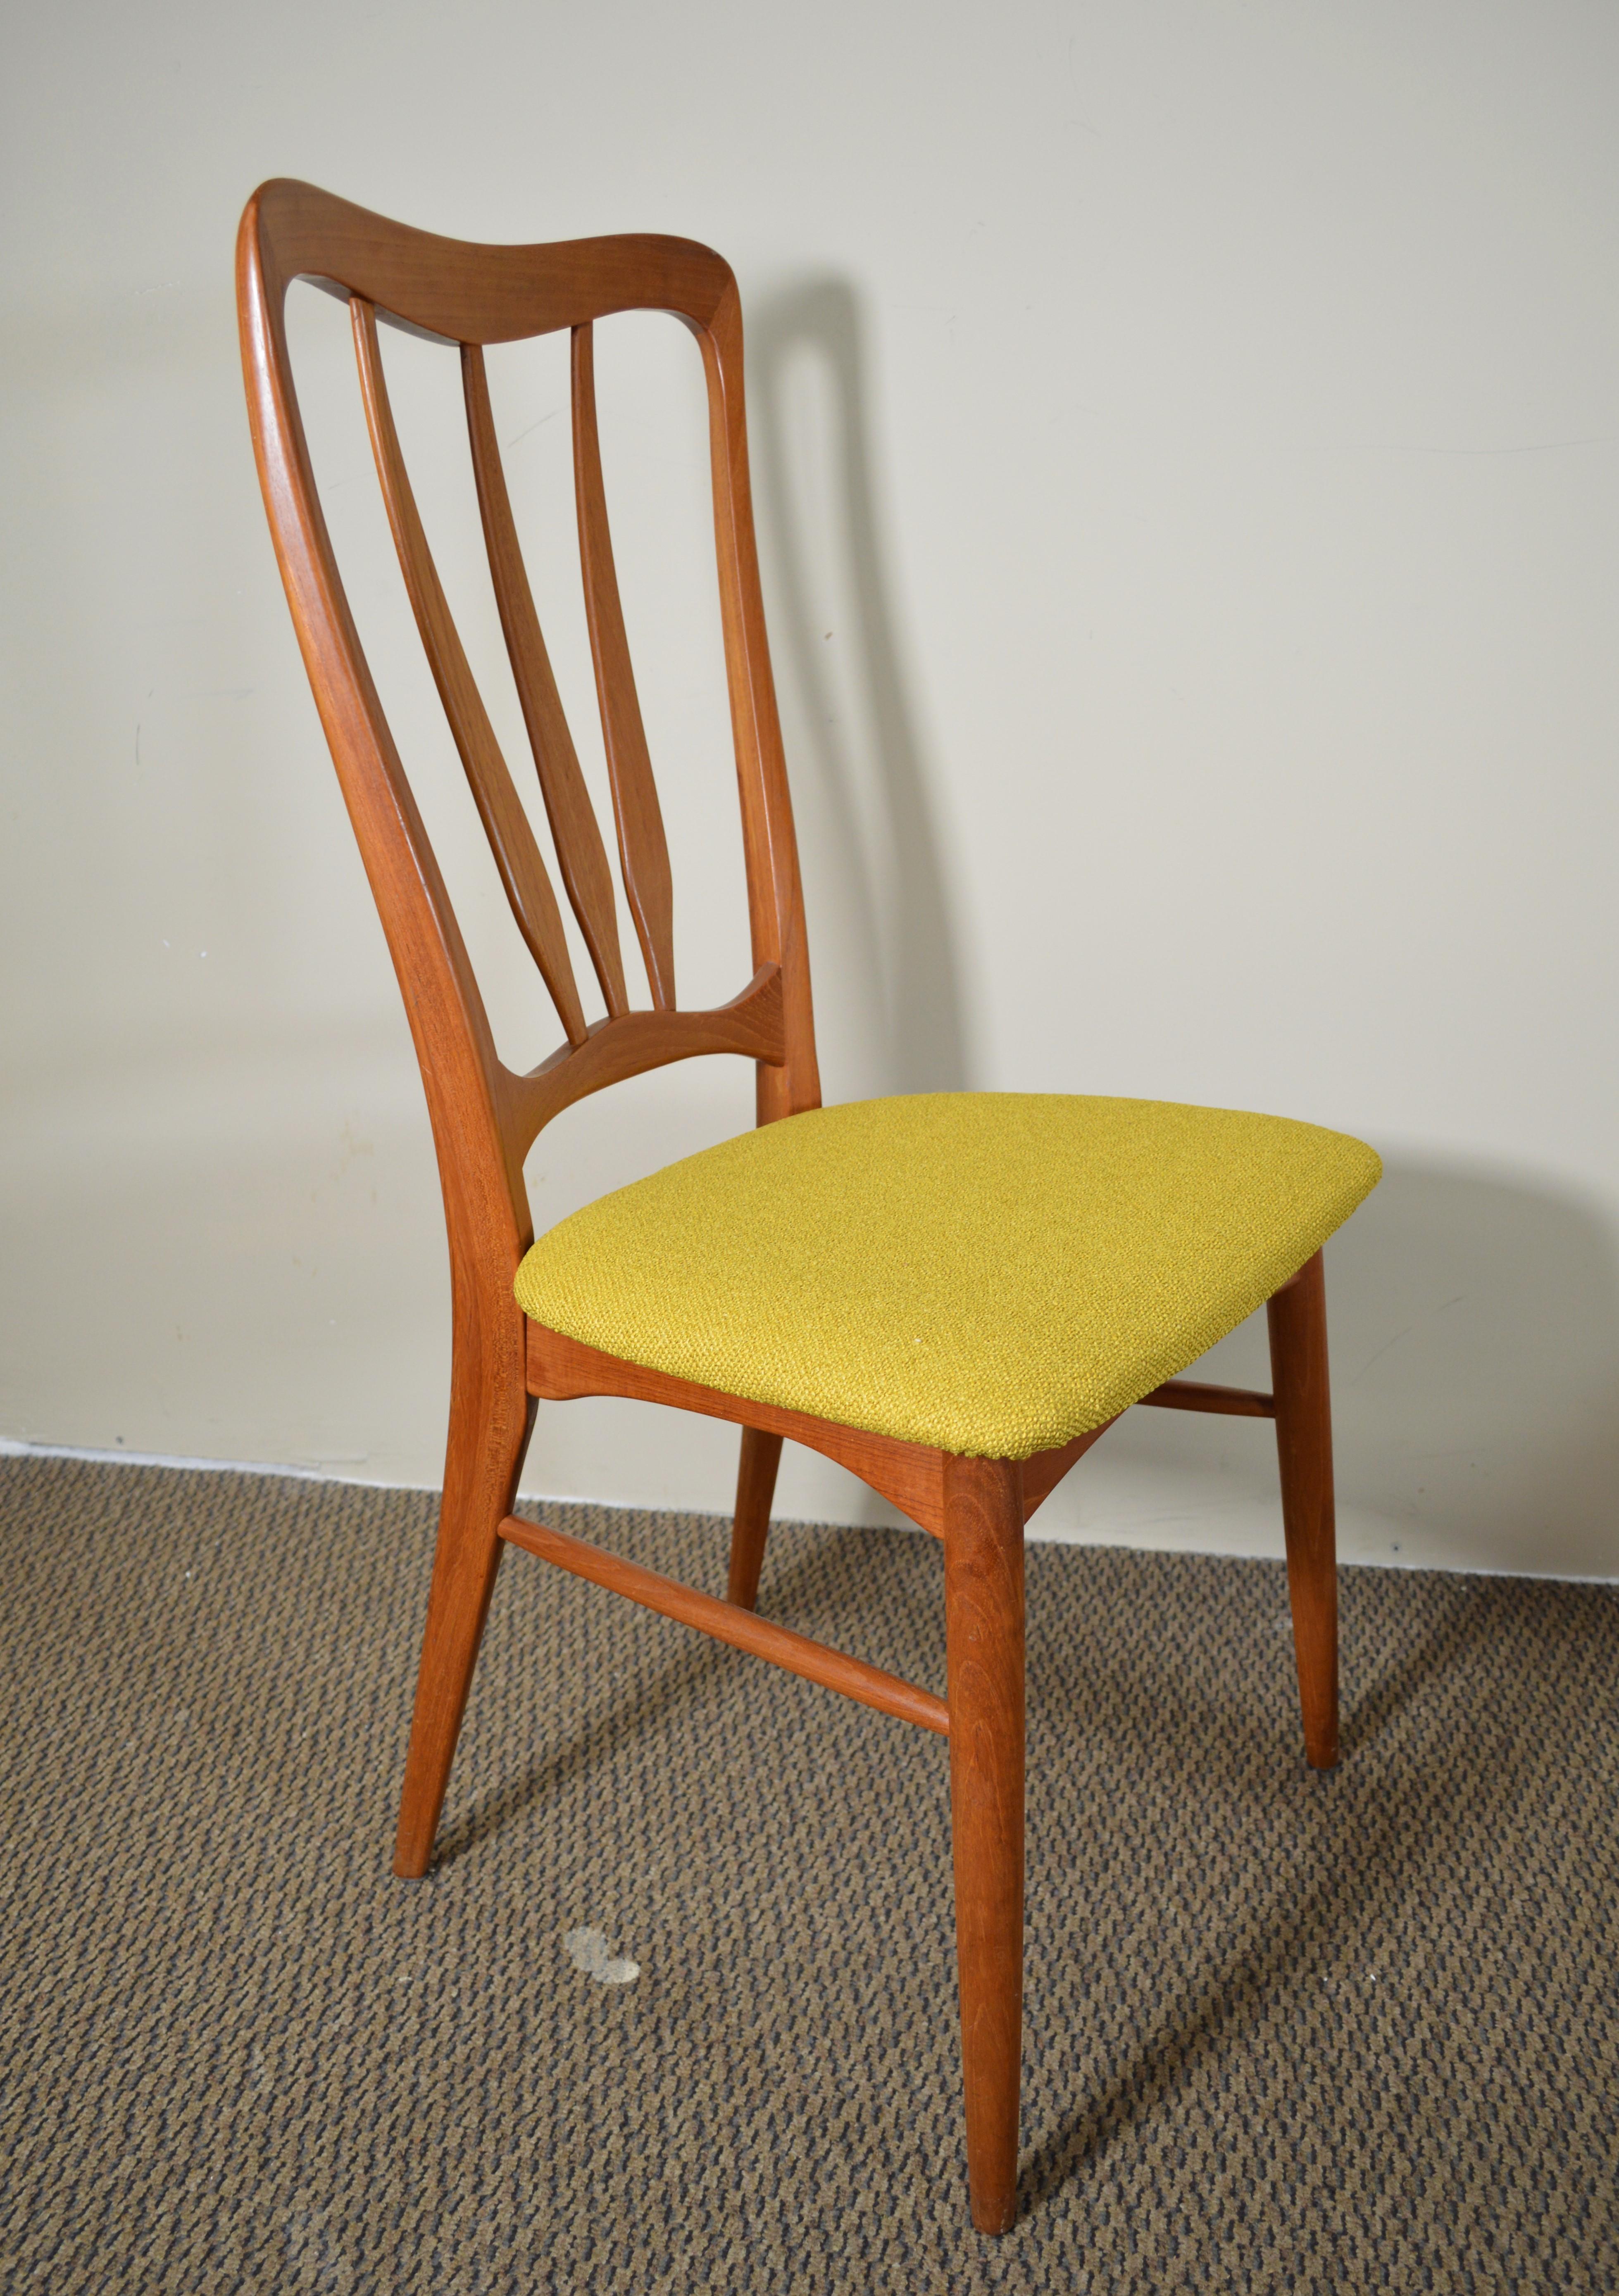 Set of 4 Danish teak dining chairs. Called Ingrid chairs designed in the 1960s by Niels Koefoeds. Made in Denmark. The best description for the chair fabric is mustard yellow. Last photo shows the color best.

Very good condition. The chairs have